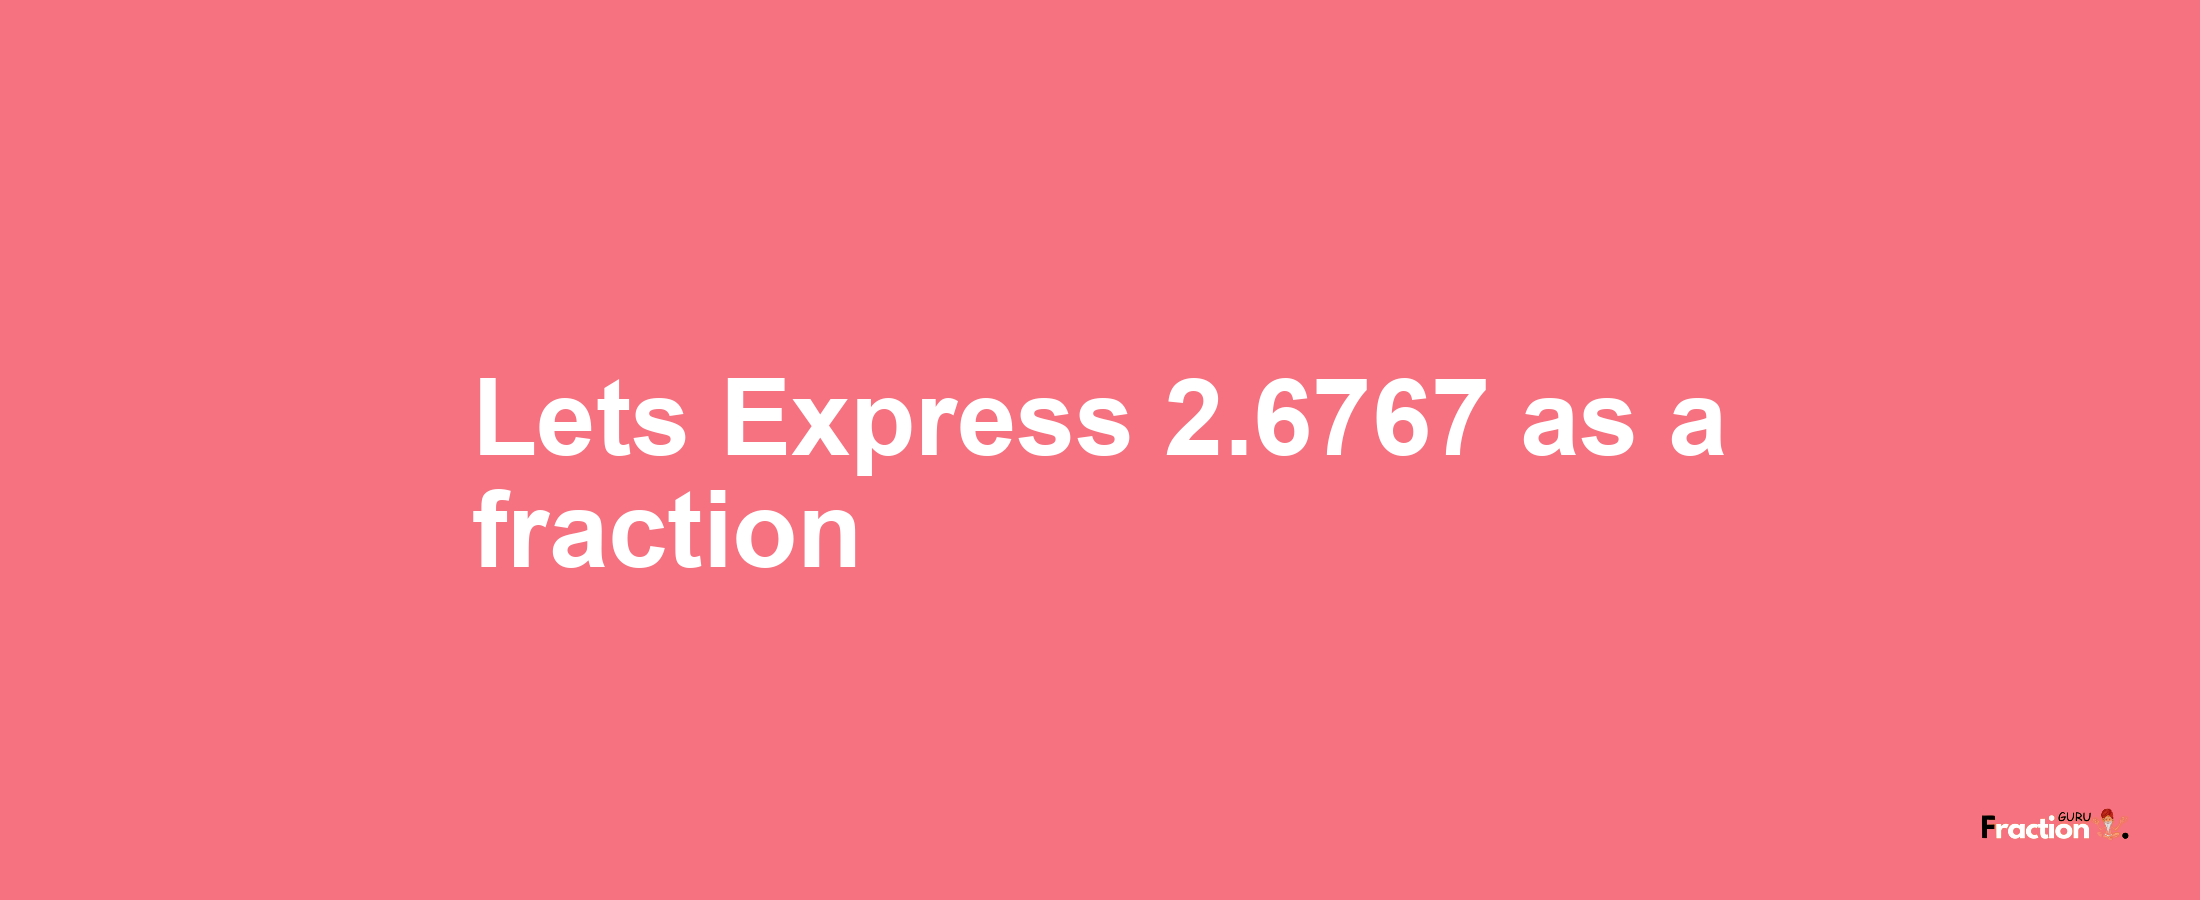 Lets Express 2.6767 as afraction